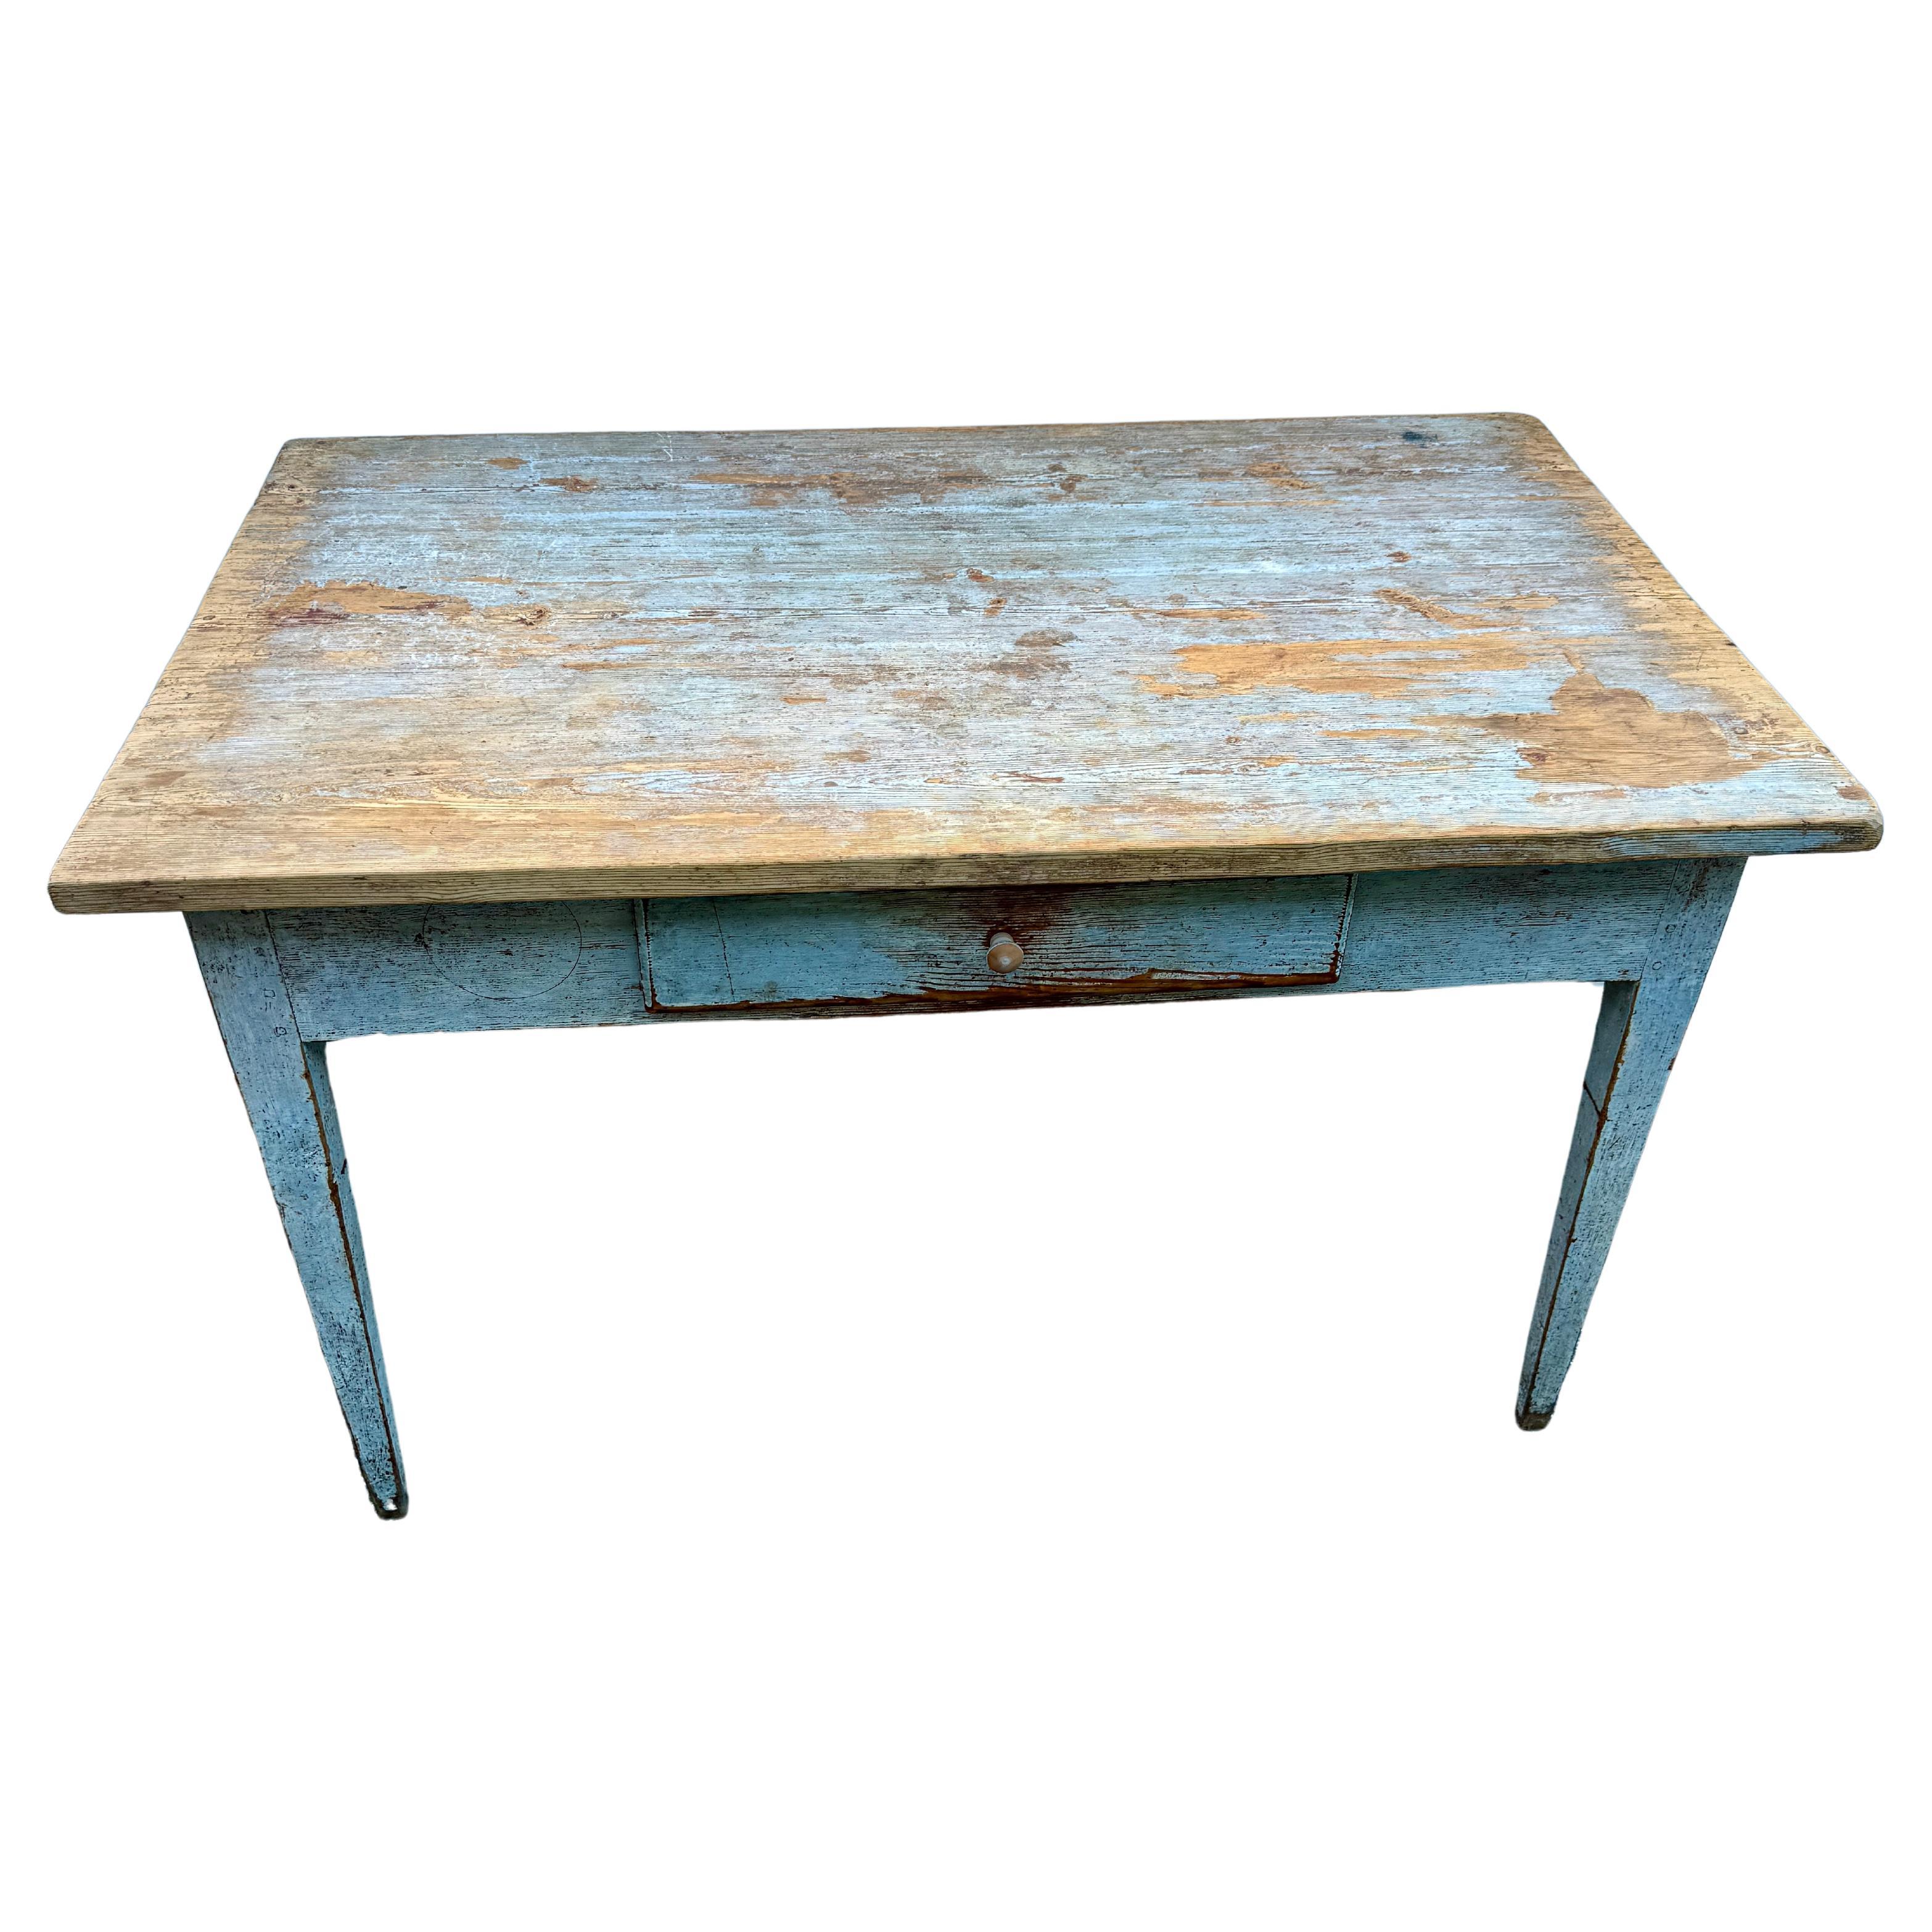 Swedish Gustavian Blue Painted Office Desk Table With Drawer, 1790-1810

Original Blue Painted Gustavian Desk with One Drawer. This piece is very solid and sturdy with removable top. Wonderful, versatile piece with fantastic patina that can be used